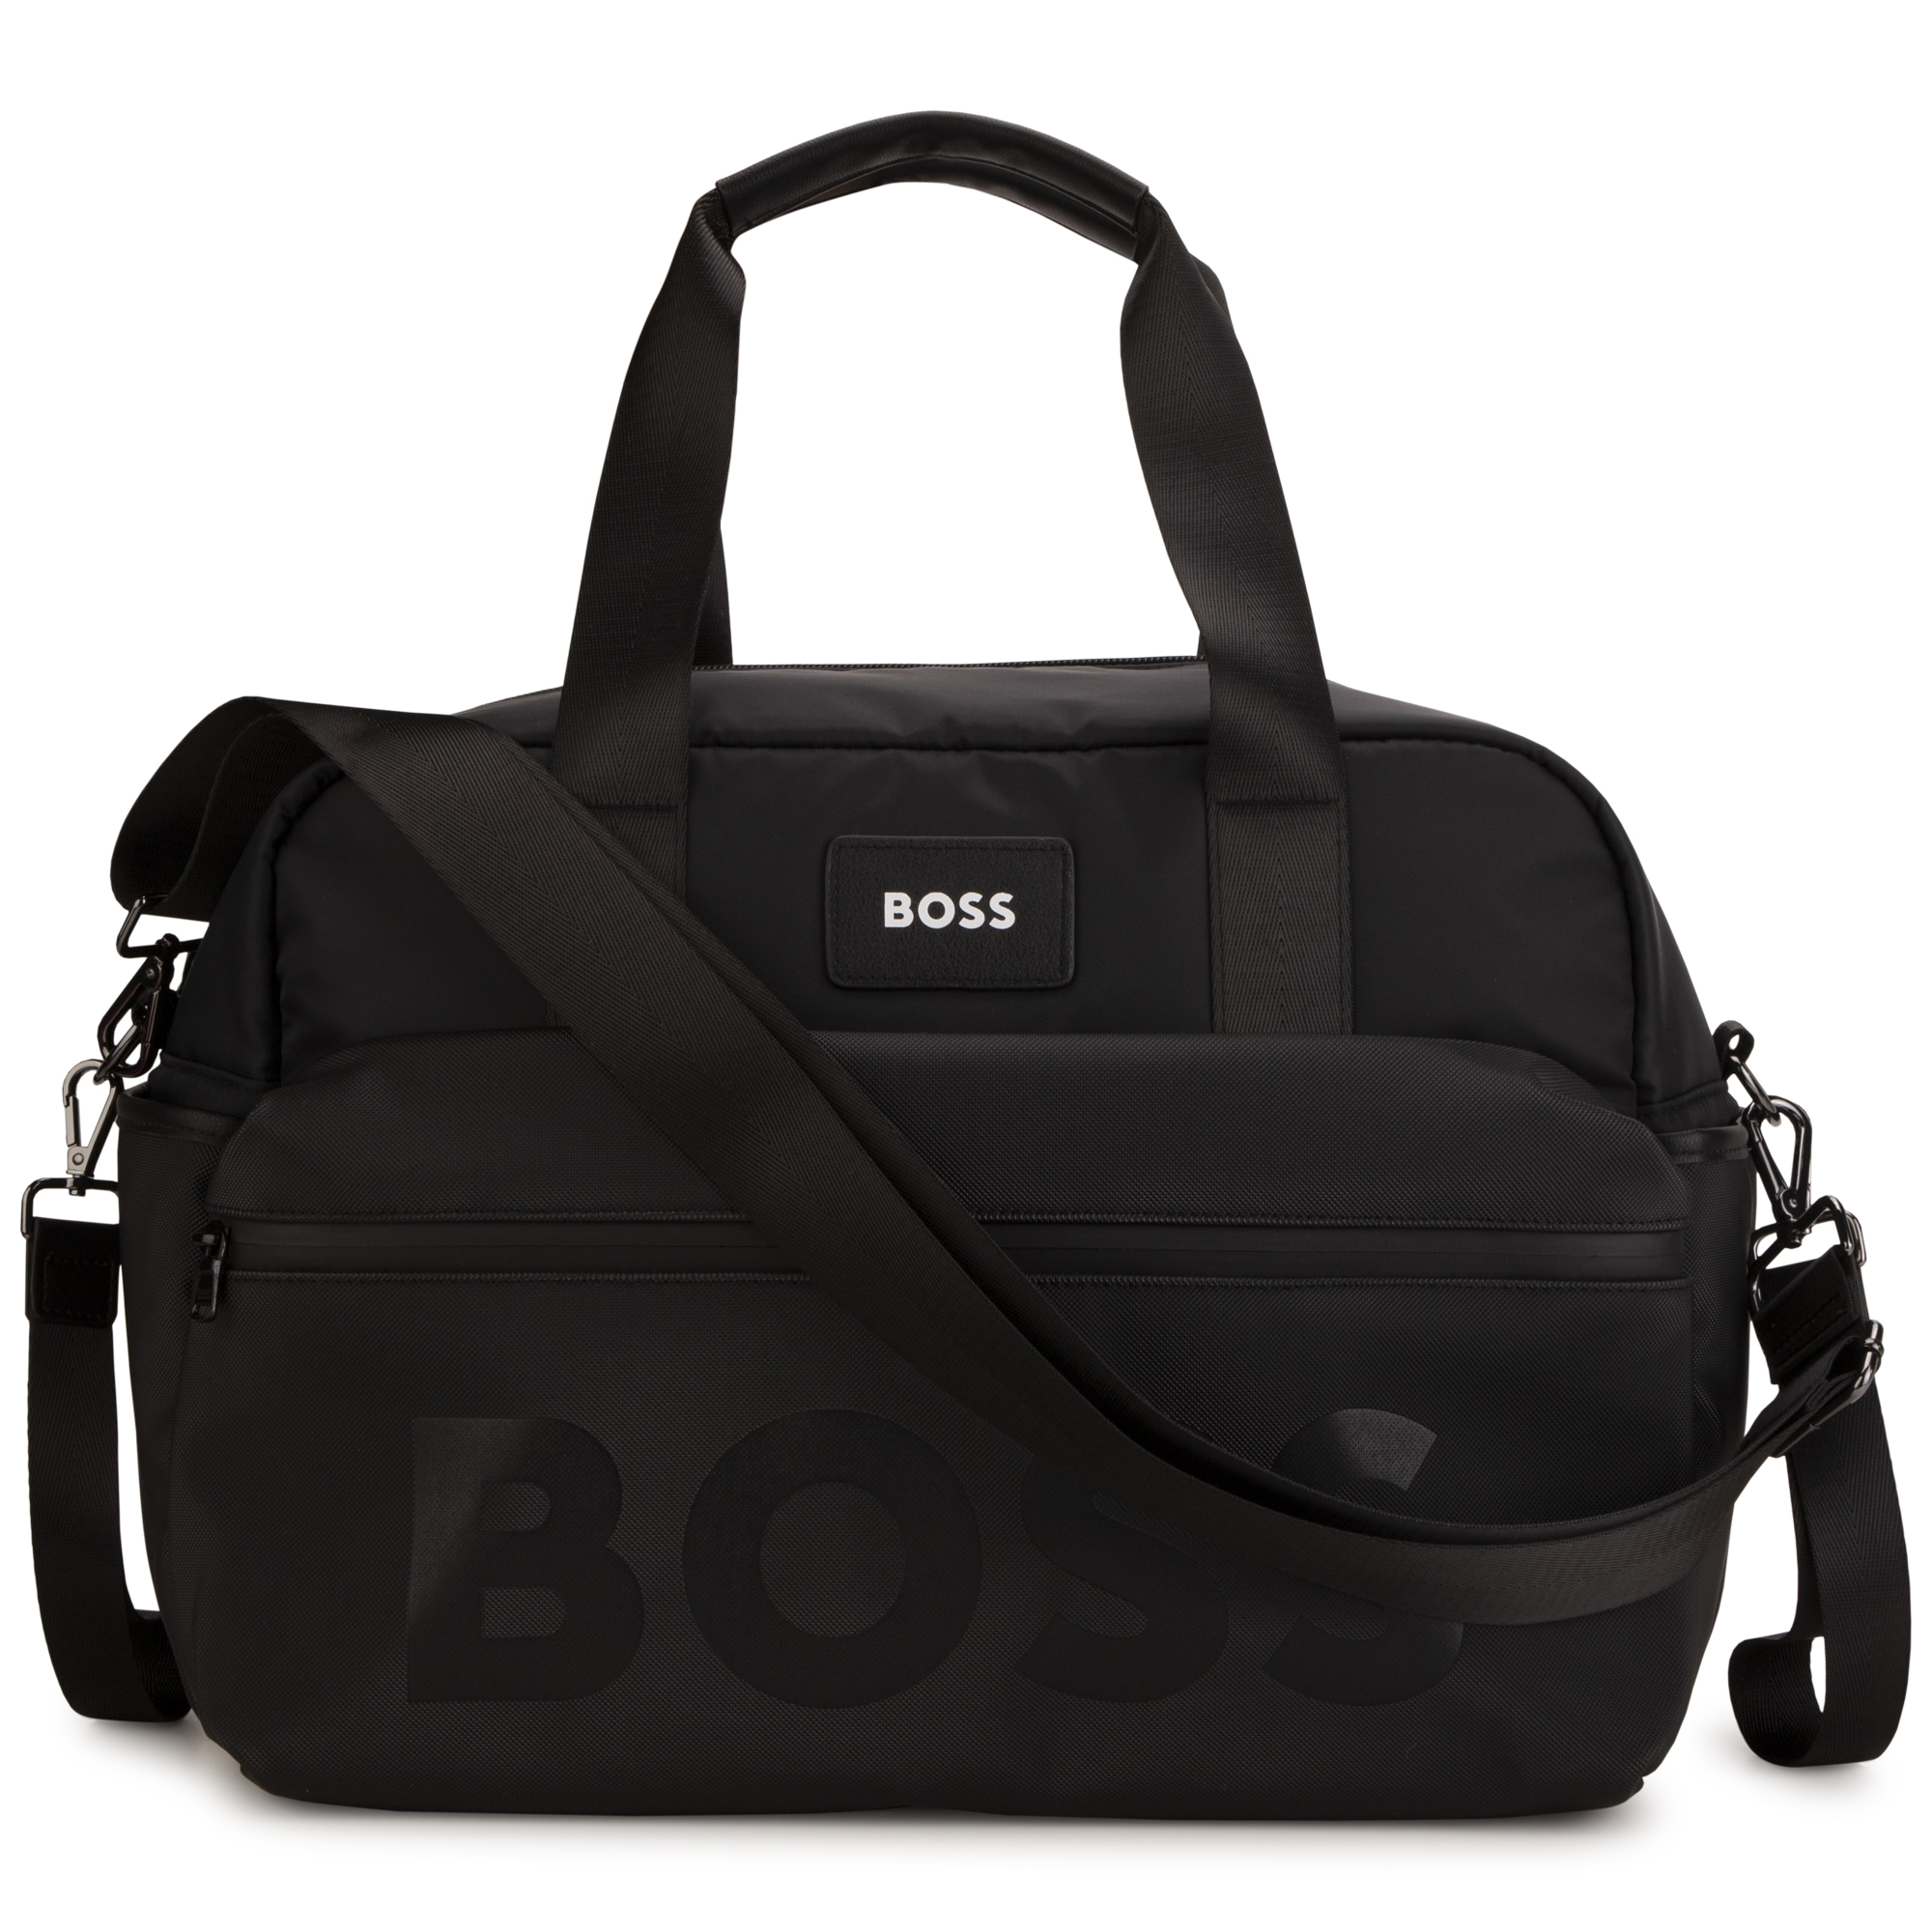 Changing bag, removable strap BOSS for UNISEX